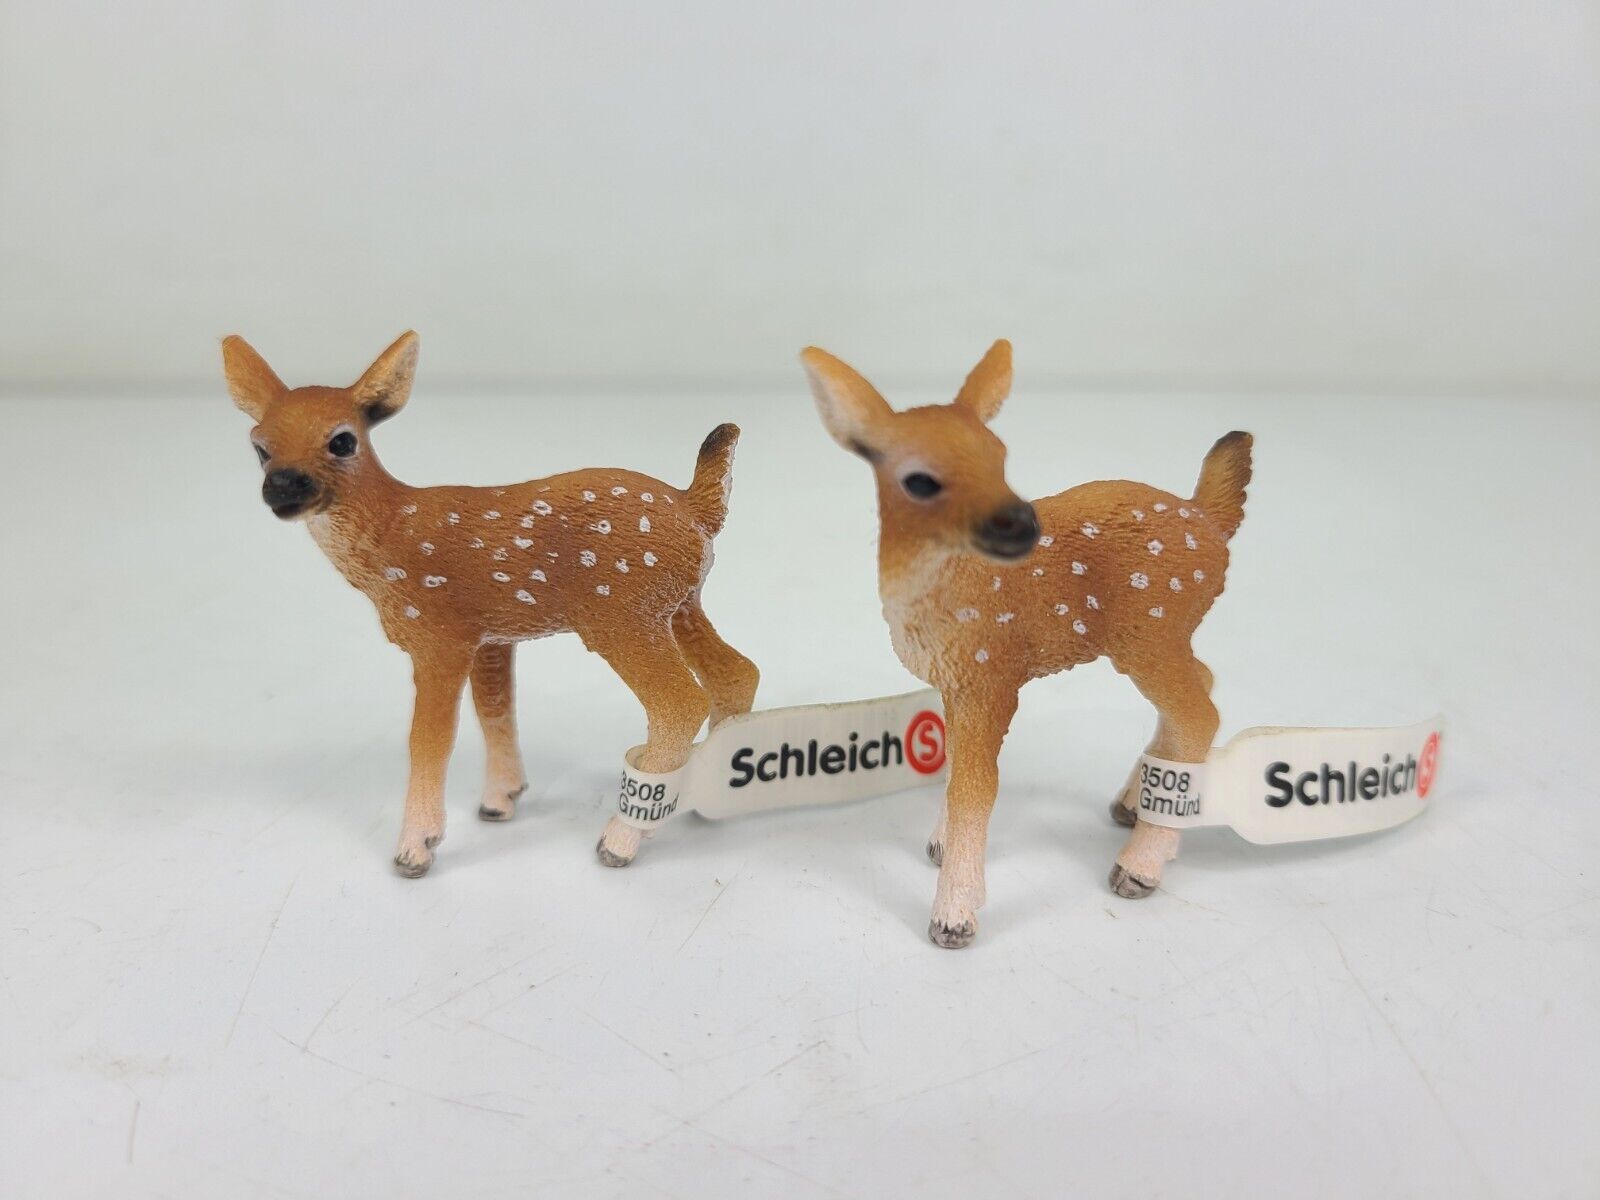 (NEW) Schleich WHITE TAIL DEER FAWN Spotted Figure 2013 Retired D-73527 Lot Of 2